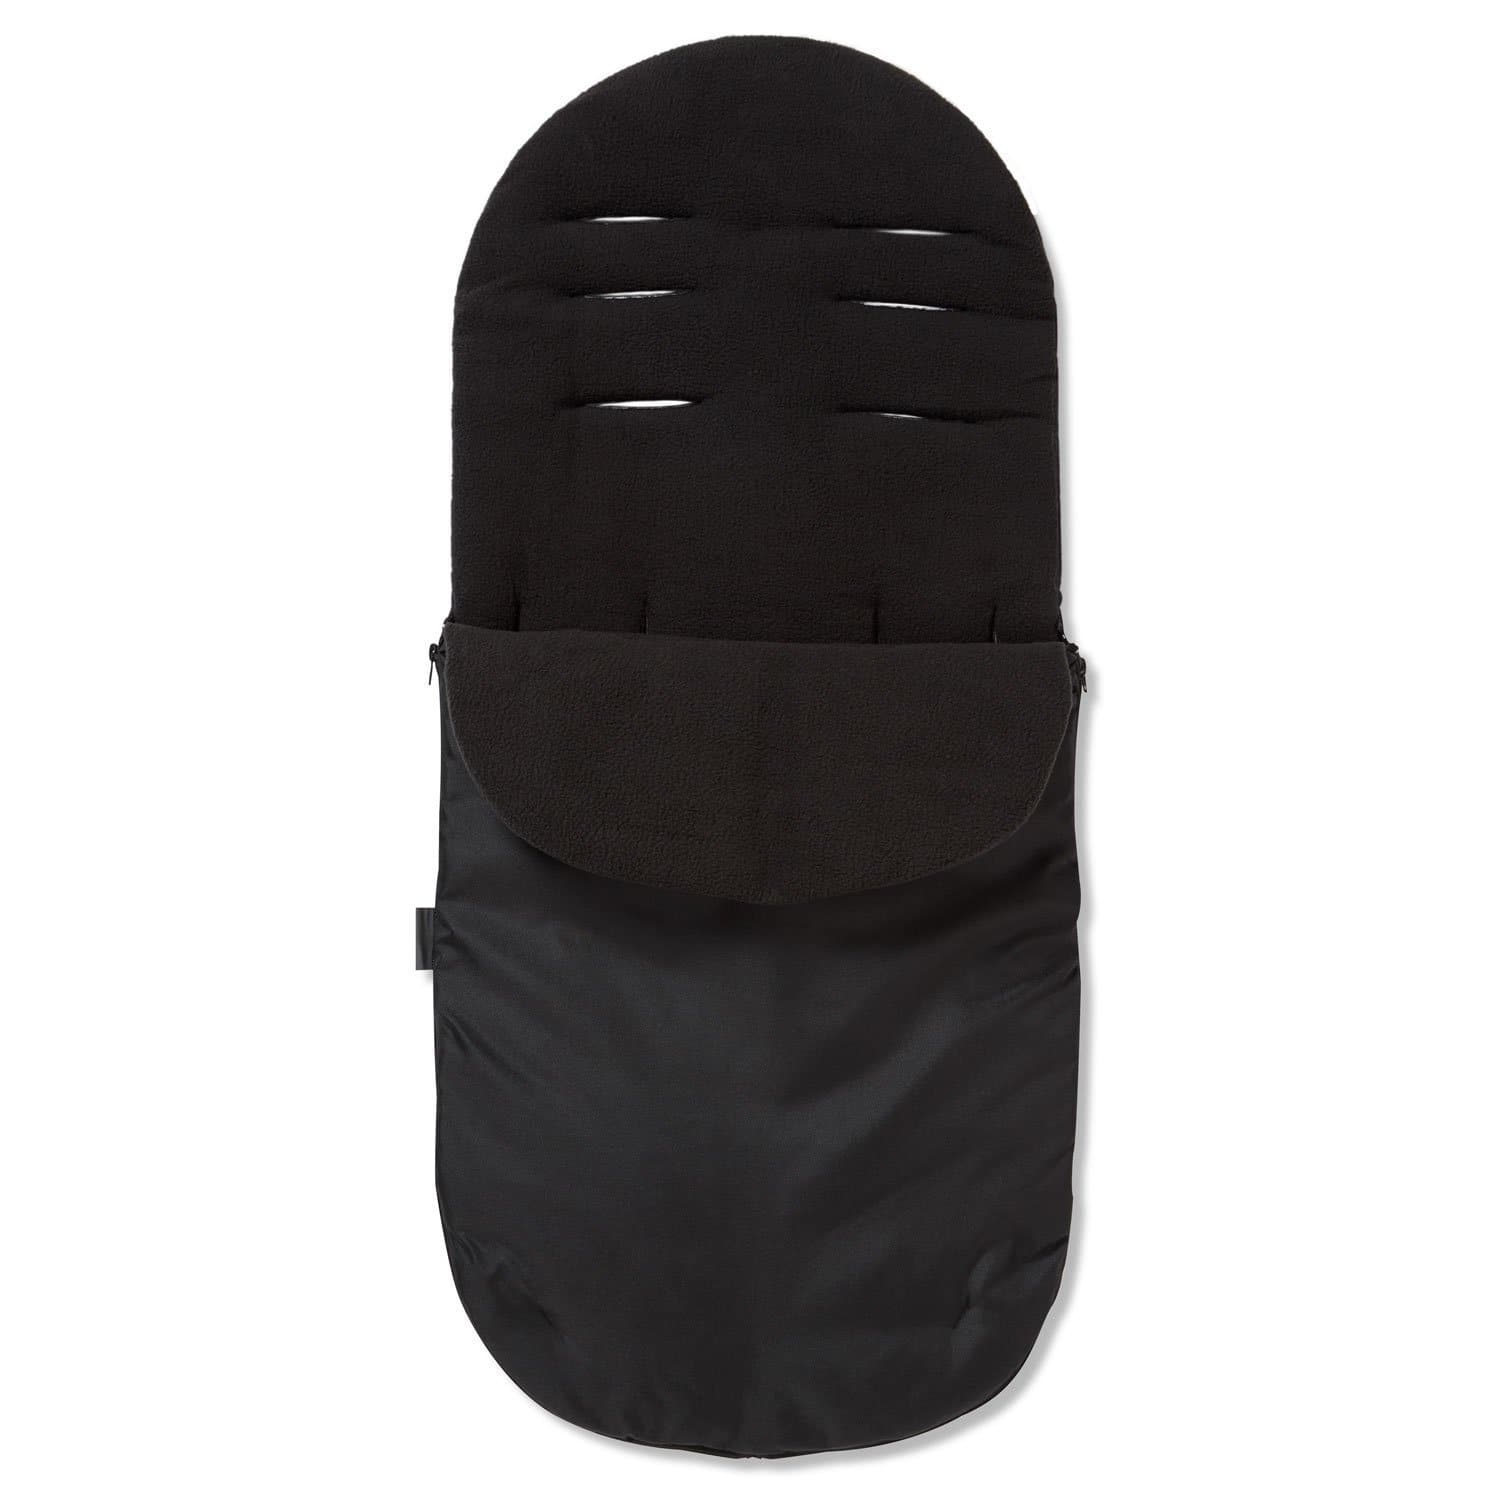 Footmuff / Cosy Toes Compatible with Inglesina - Black / Fits All Models | For Your Little One